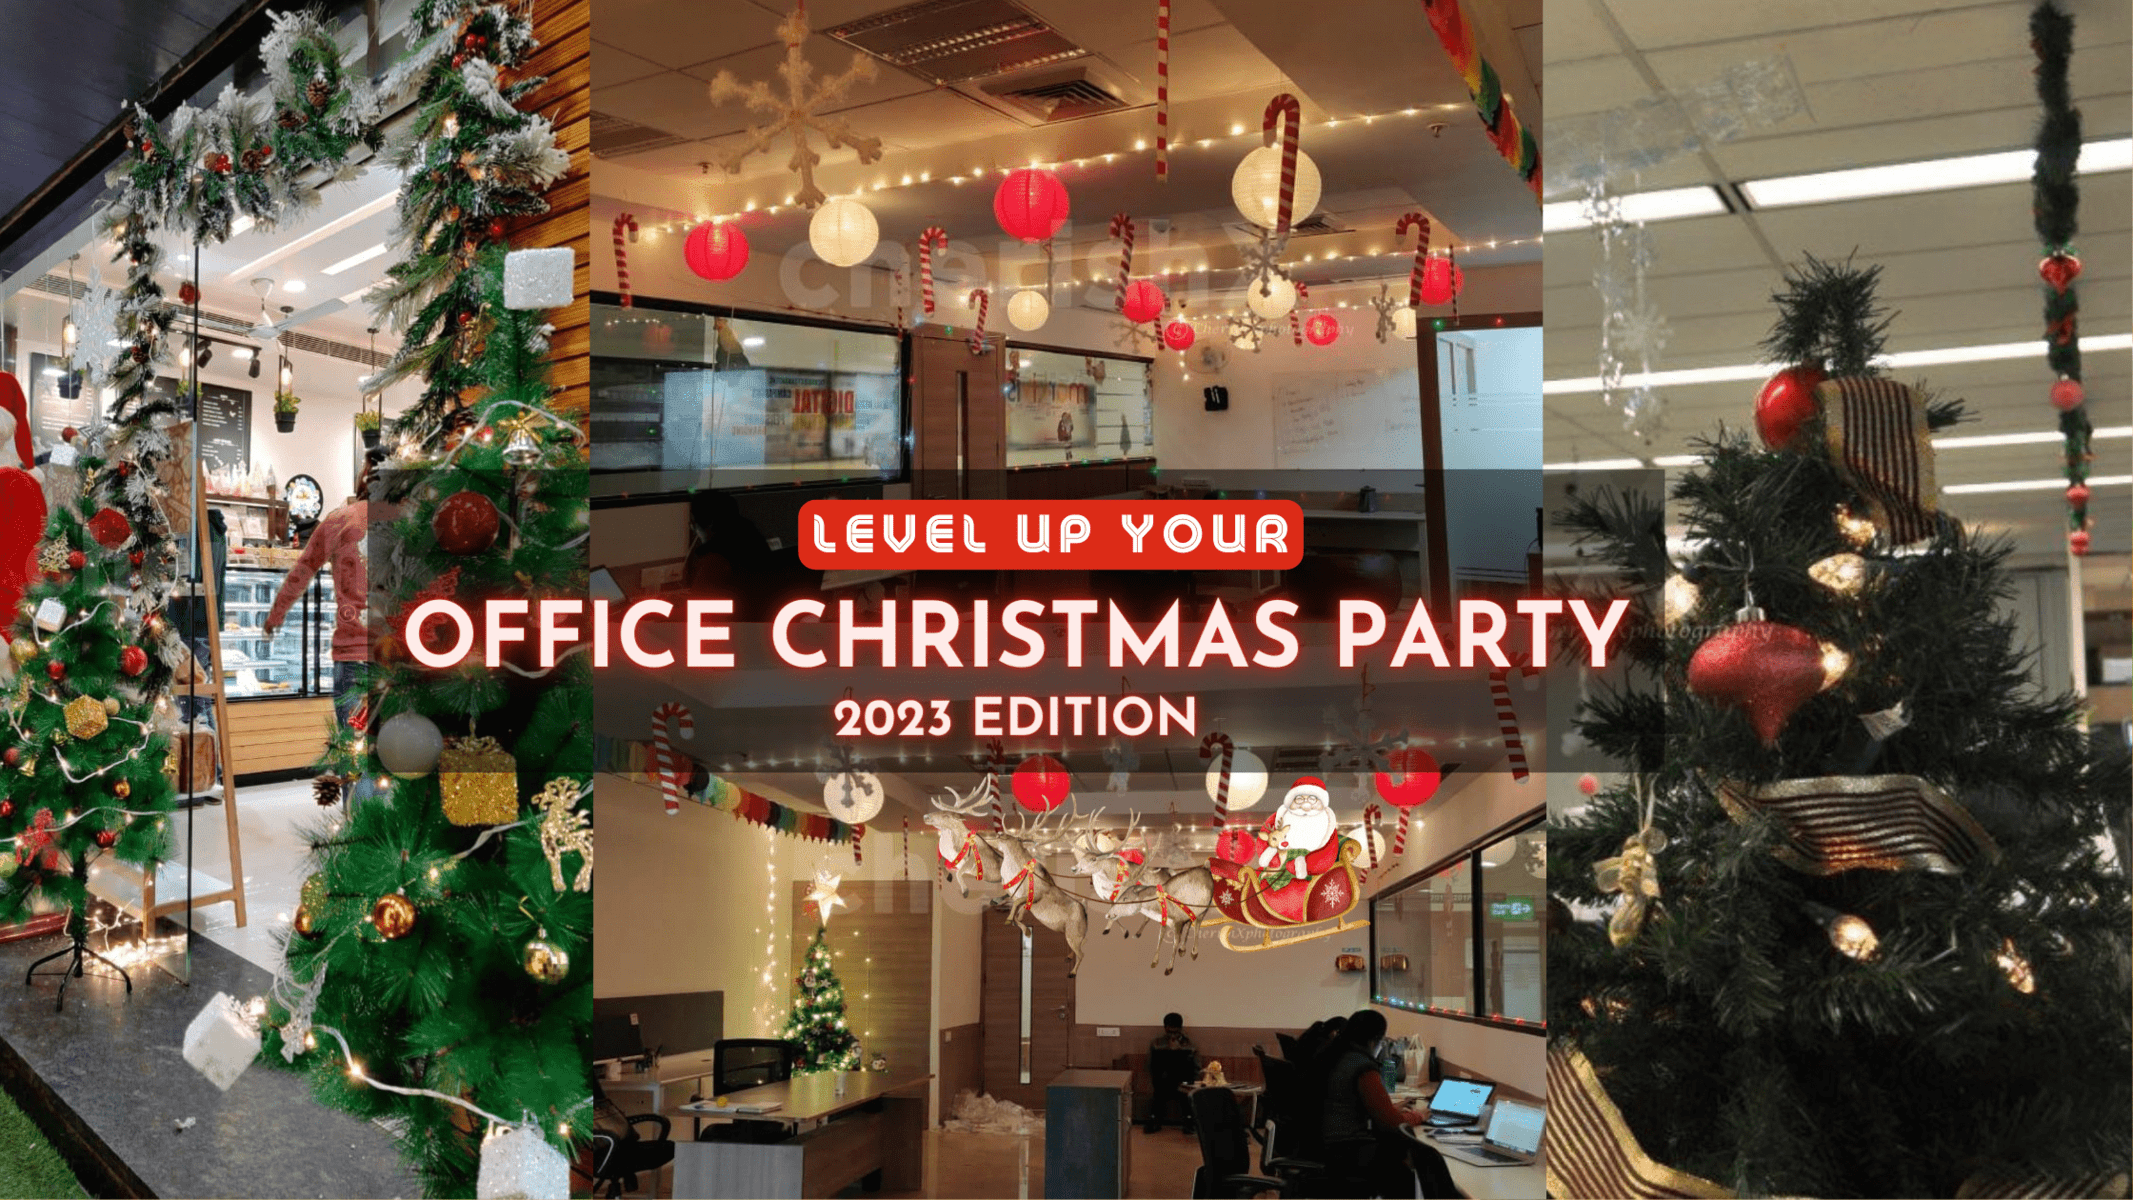 Level up your Office Christmas Party with Themed Decorations- Easy Guide